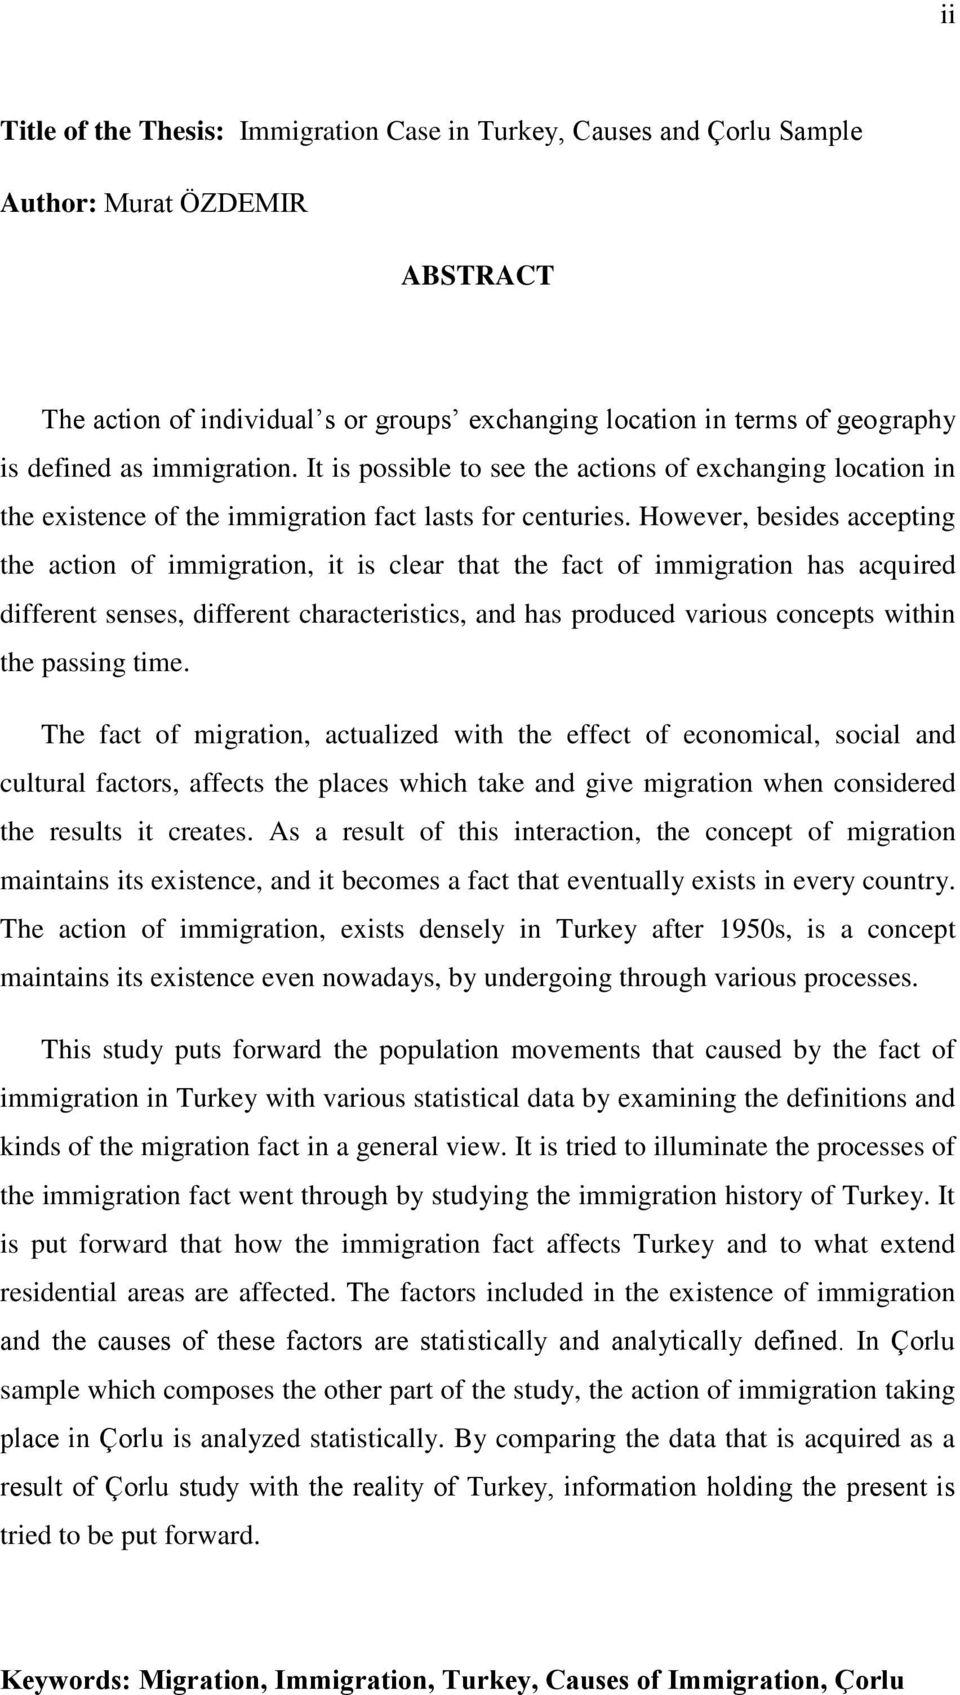 However, besides accepting the action of immigration, it is clear that the fact of immigration has acquired different senses, different characteristics, and has produced various concepts within the